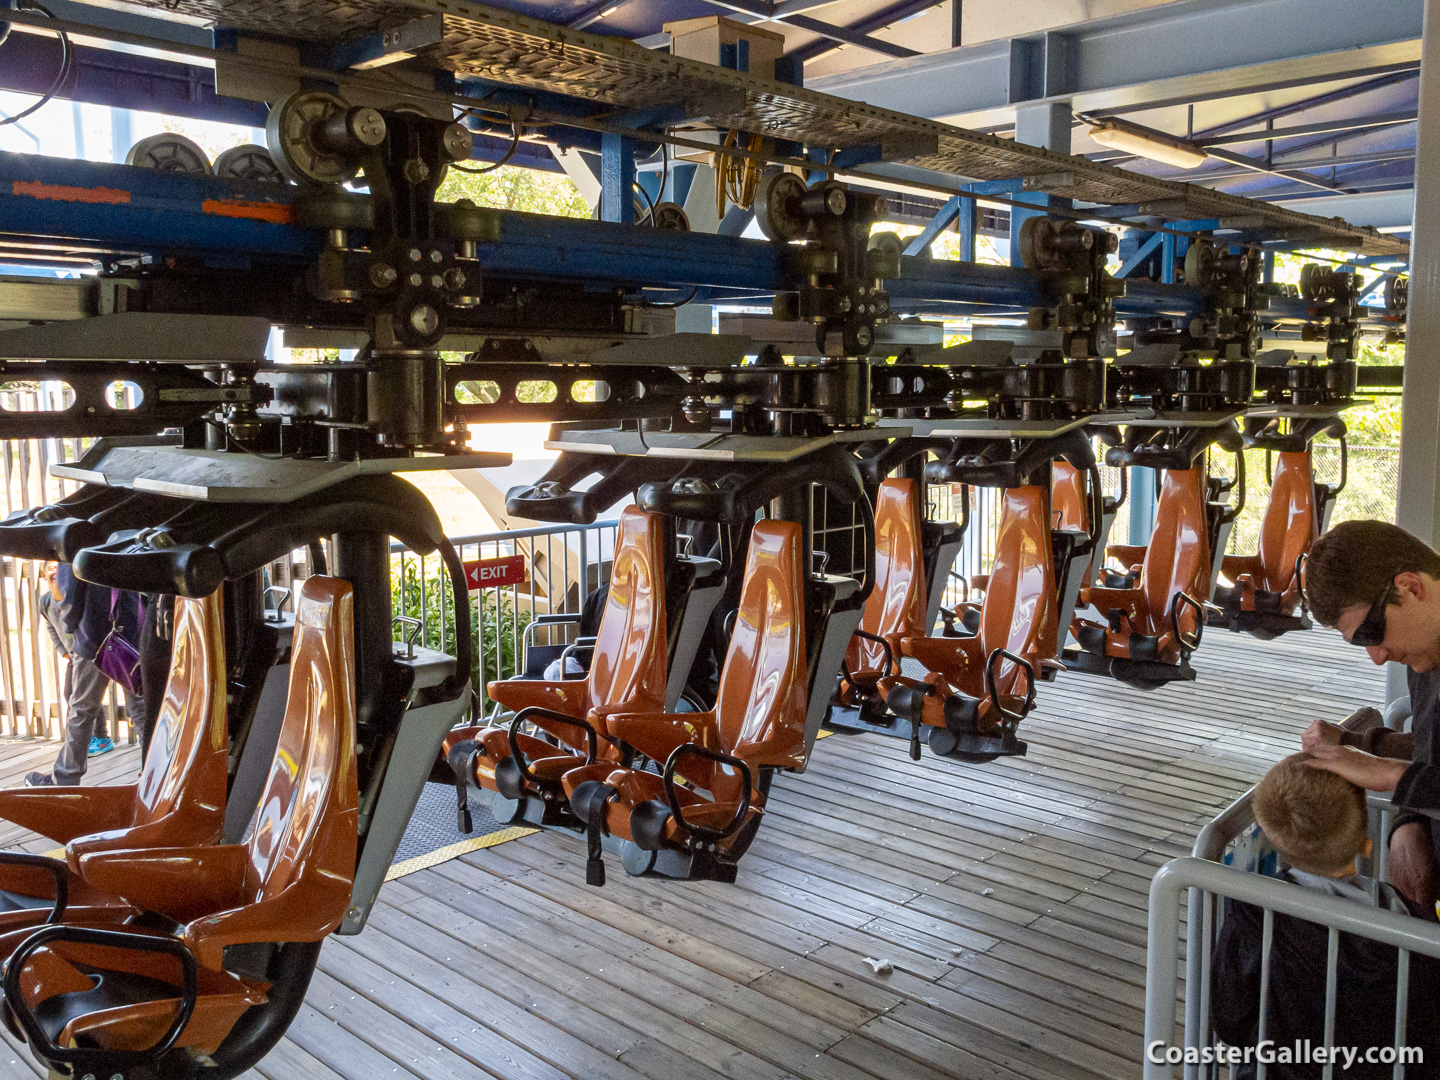 First generation Family Suspended Coaster built by Vekoma